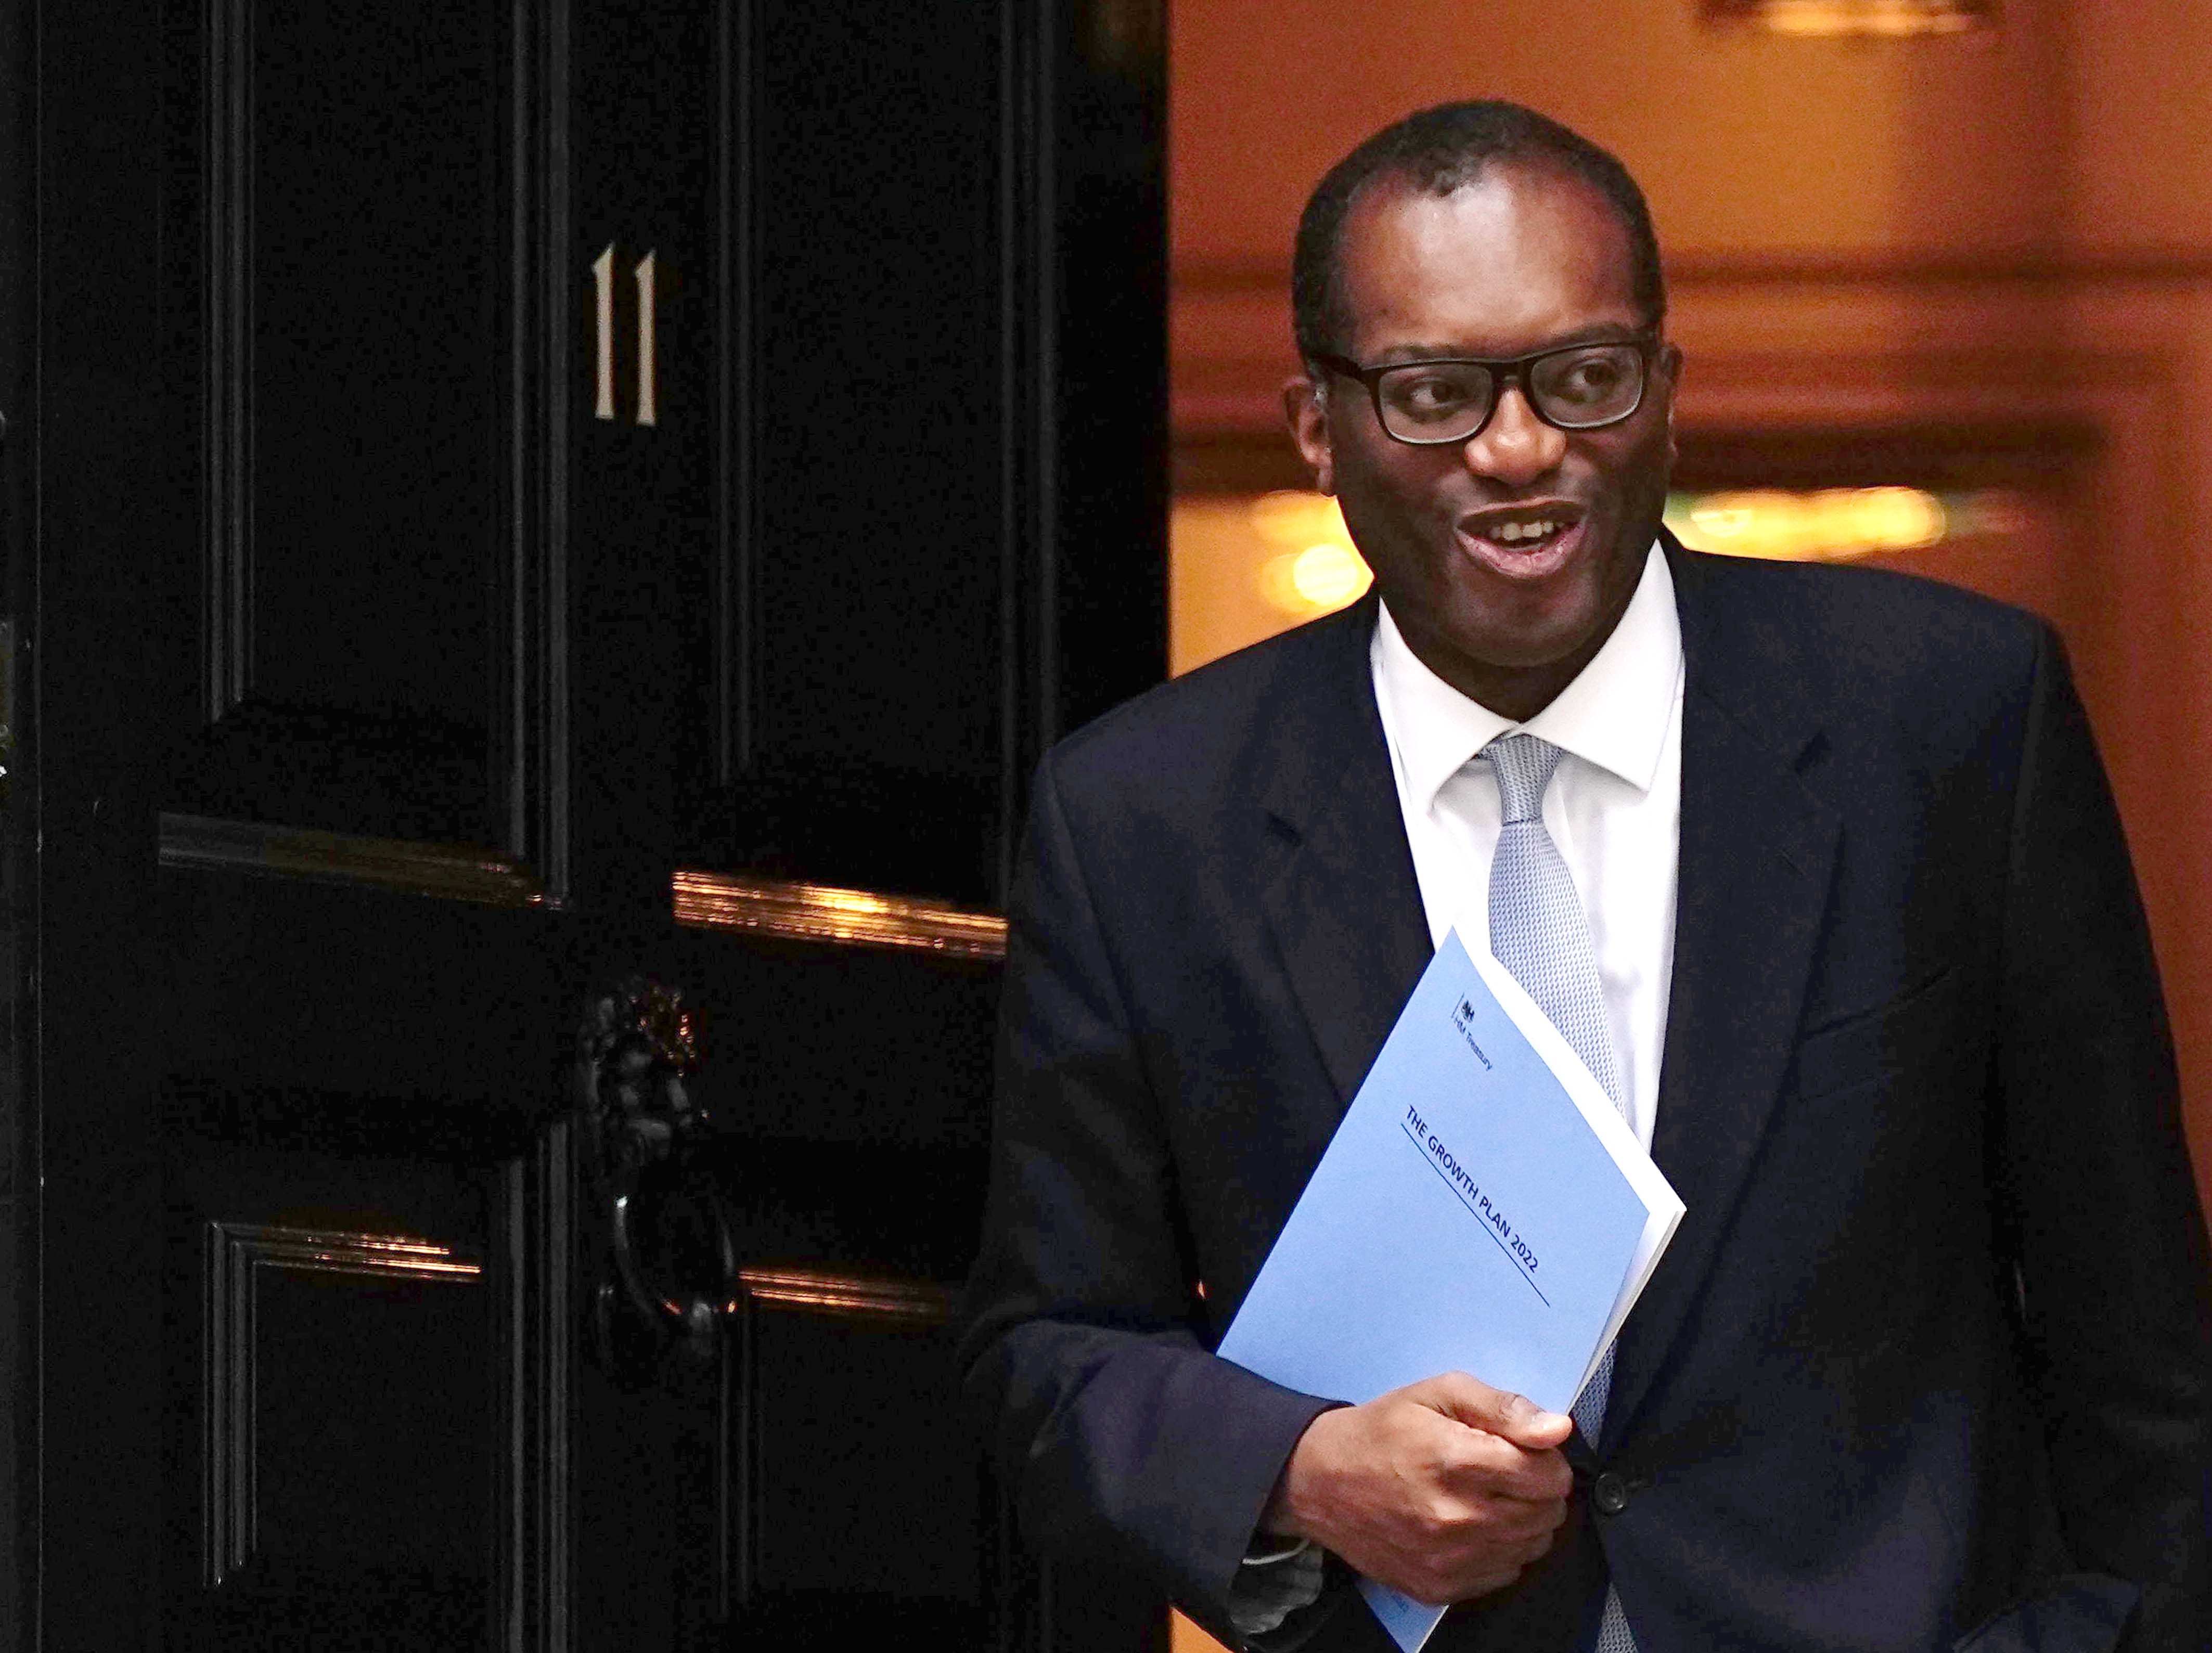 Kwasi Kwarteng’s raft of historic tax cuts received a hostile reception from economists